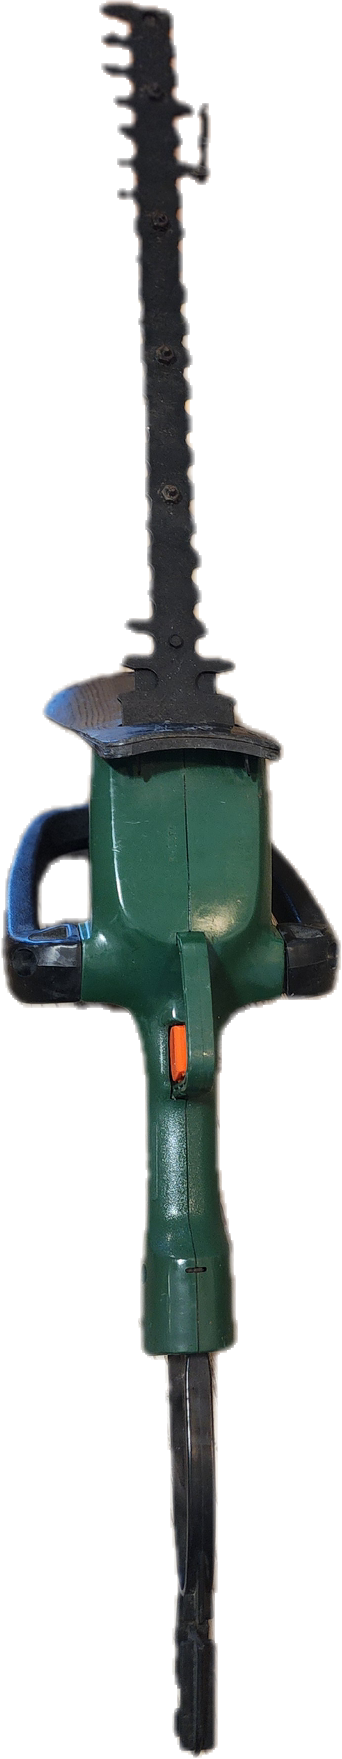 Hedge Trimmer Pre owned good condition